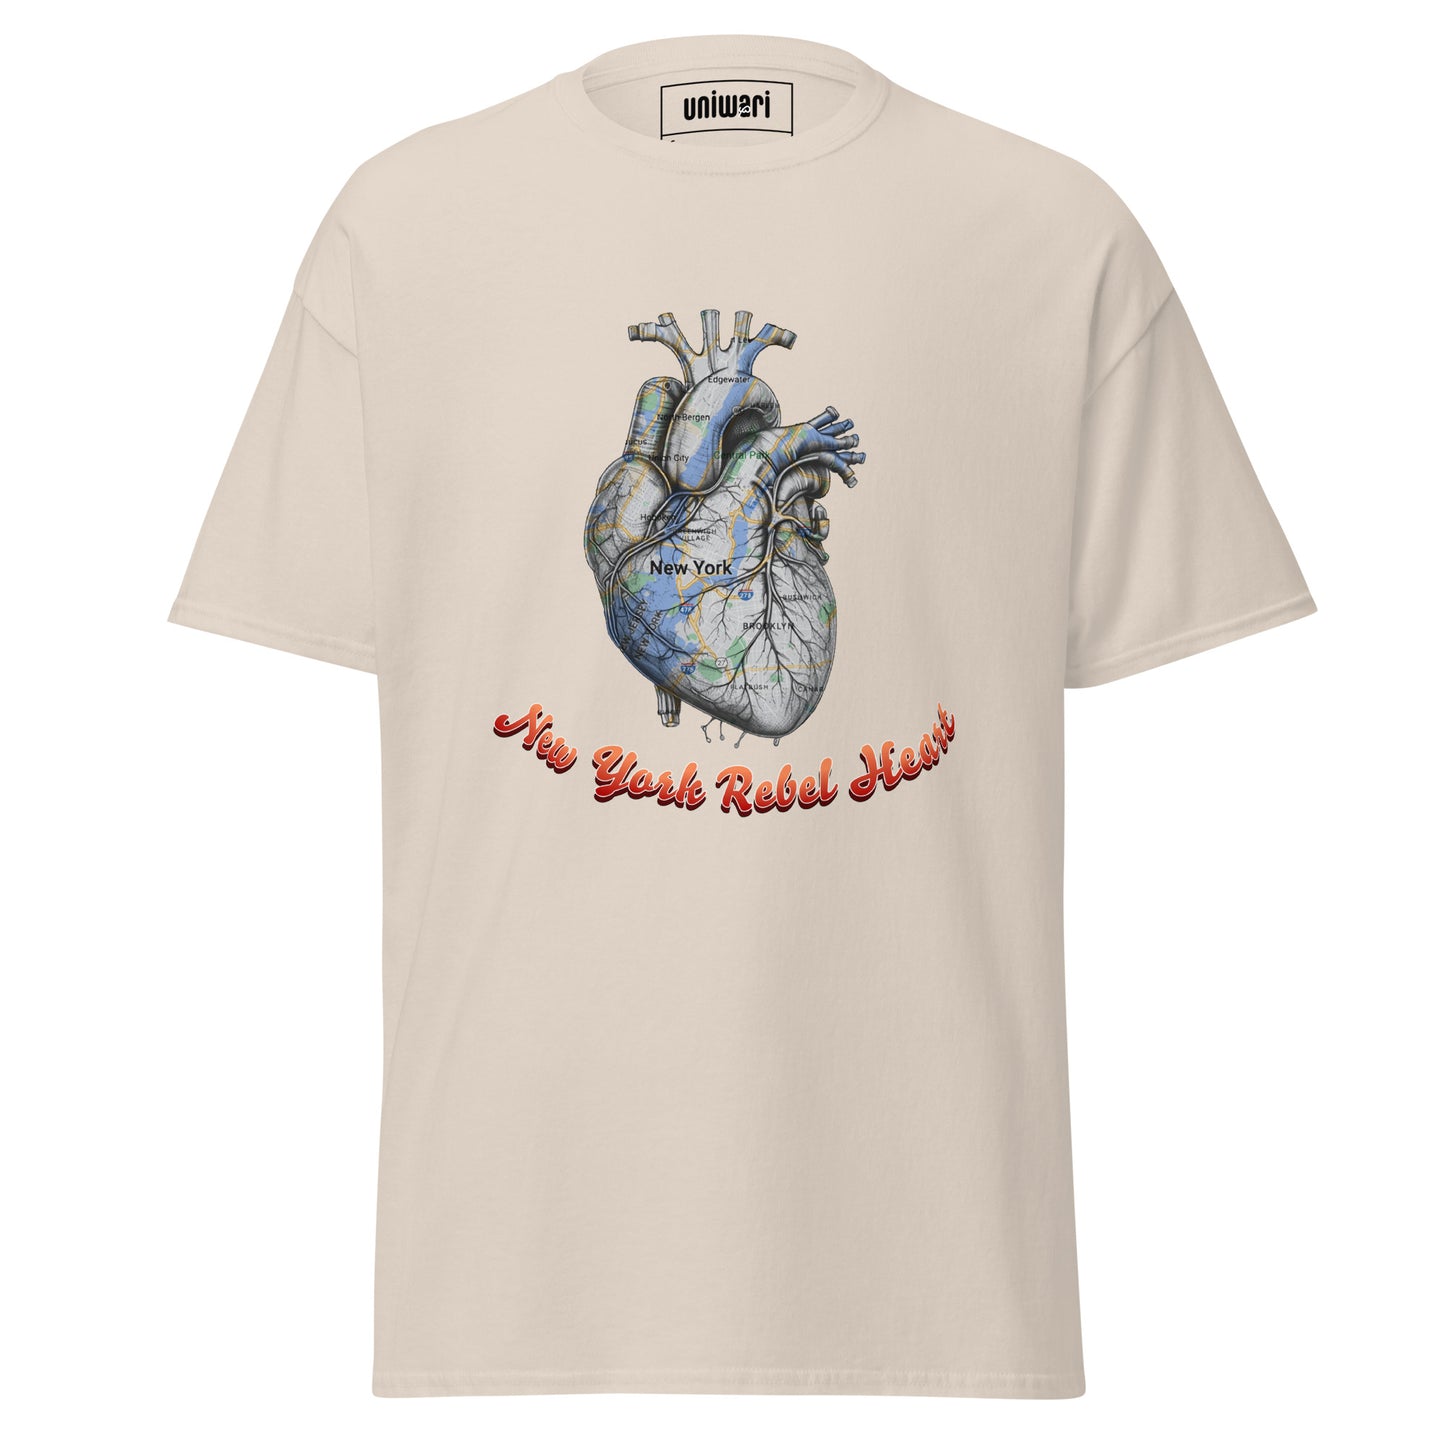 Beige High Quality Tee - Front Design with a Heart Shaped Map of New York and a Phrase "New York Rebel Heart" print